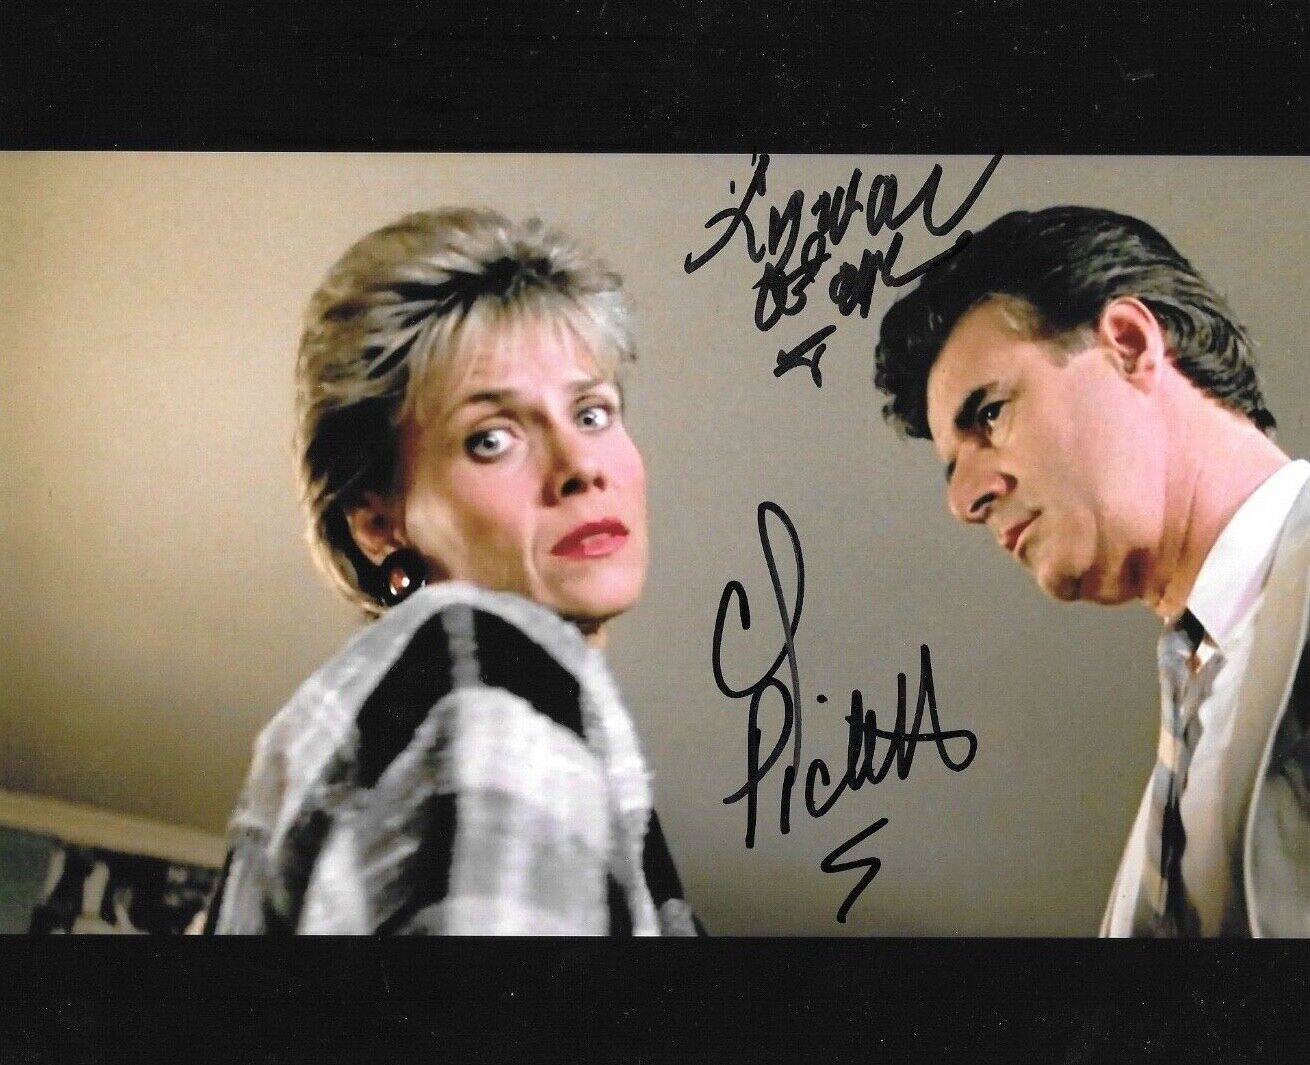 * LYMAN WARD & CINDY PICKETT * signed 8x10 Photo Poster painting * FERRIS BUELLER'S DAY OFF * 7